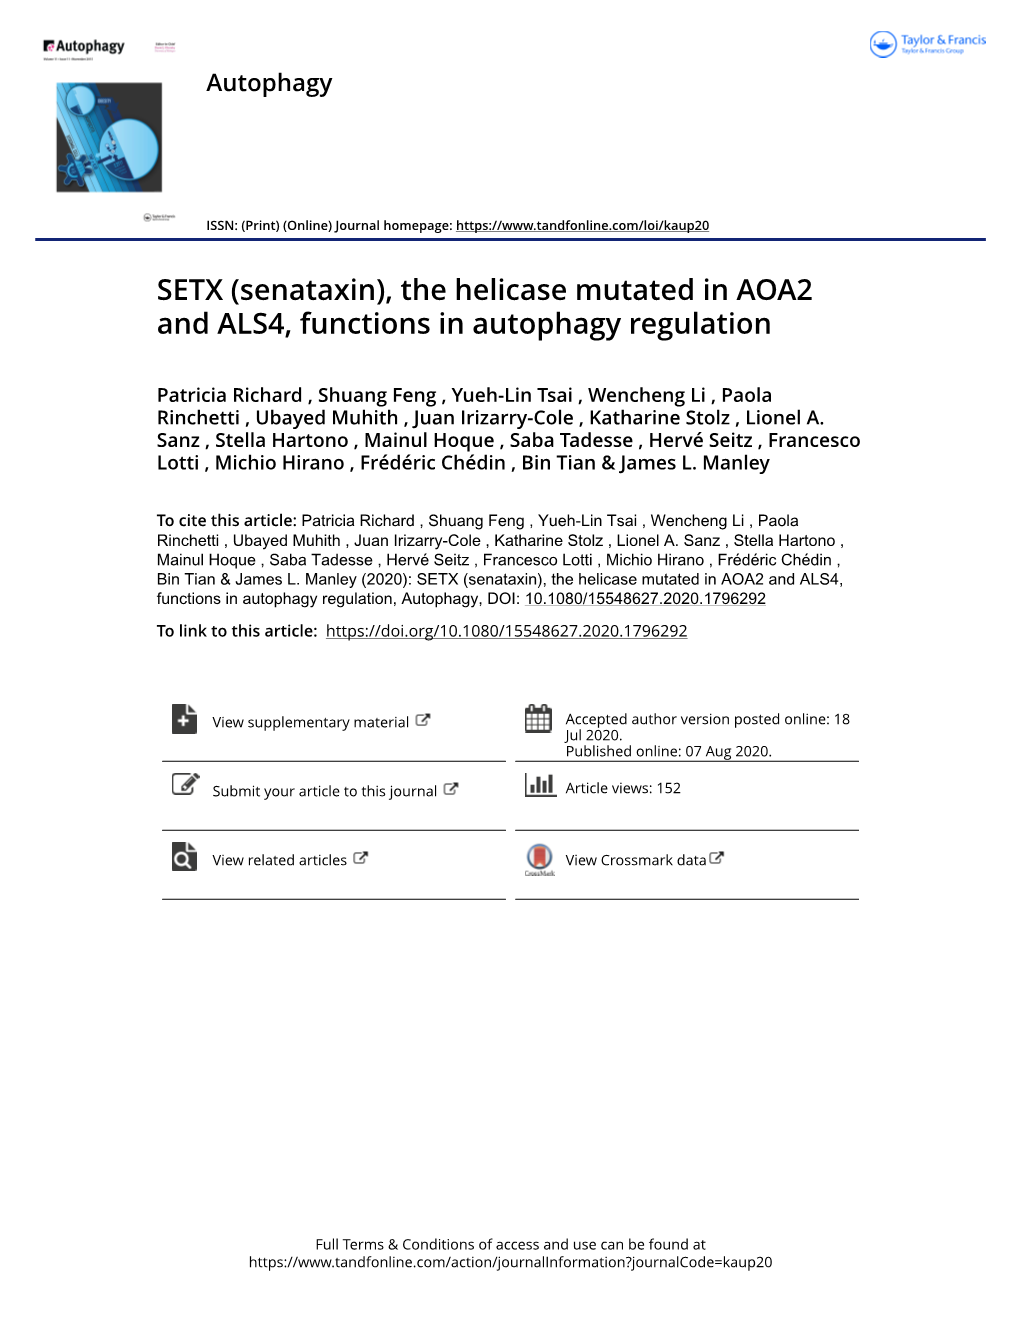 SETX (Senataxin), the Helicase Mutated in AOA2 and ALS4, Functions in Autophagy Regulation